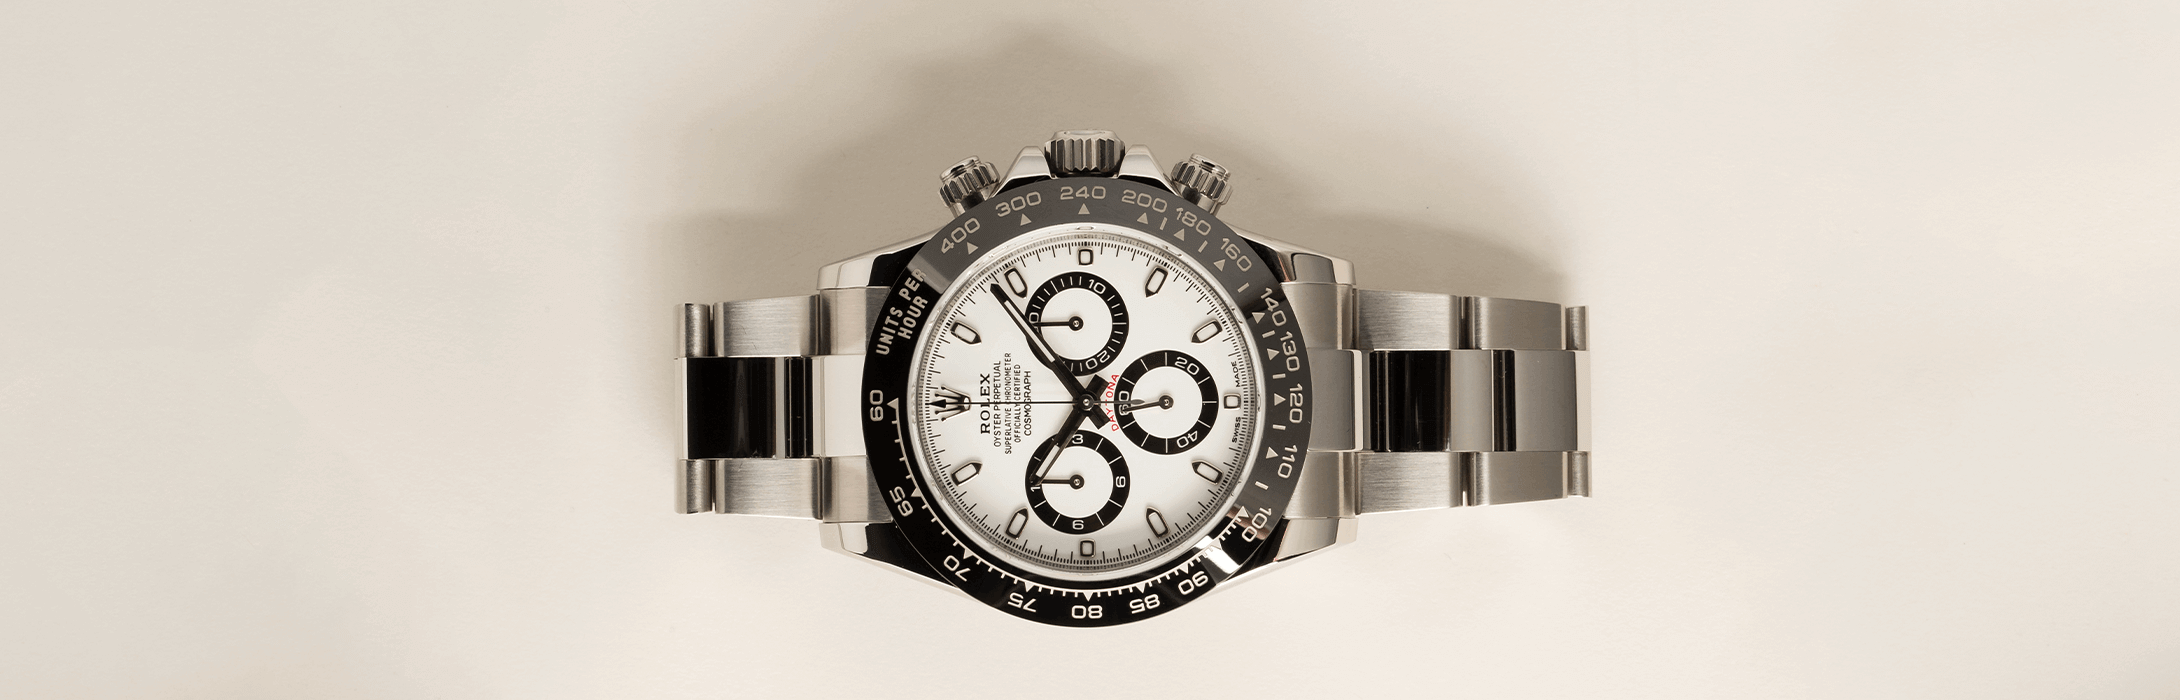 Rolex-Watches-Everyone-Used-to-Hate-and-Now-Love